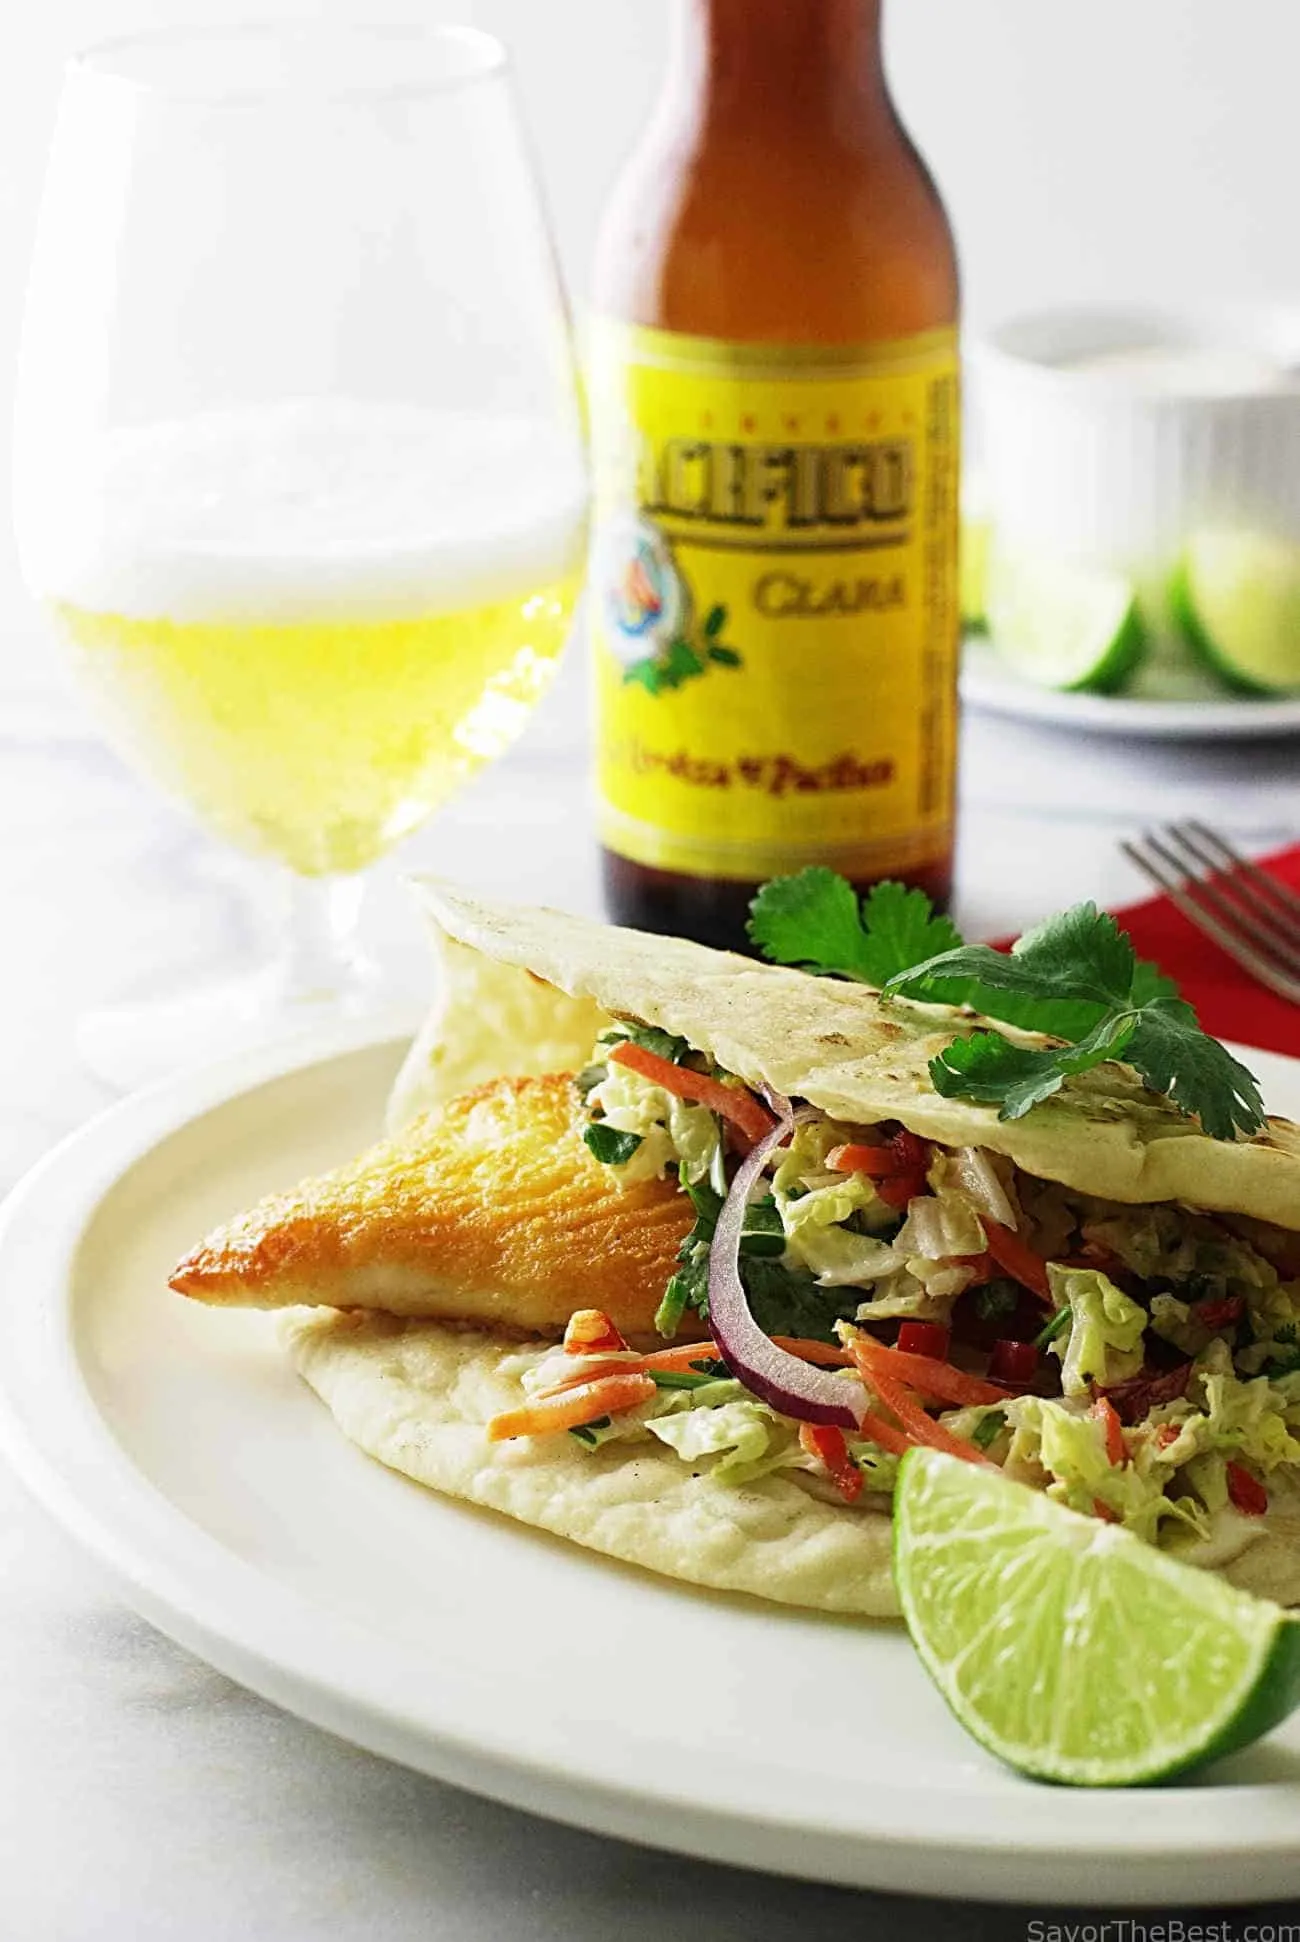 Tex-Mex Fish Tacos with Chipotle Slaw